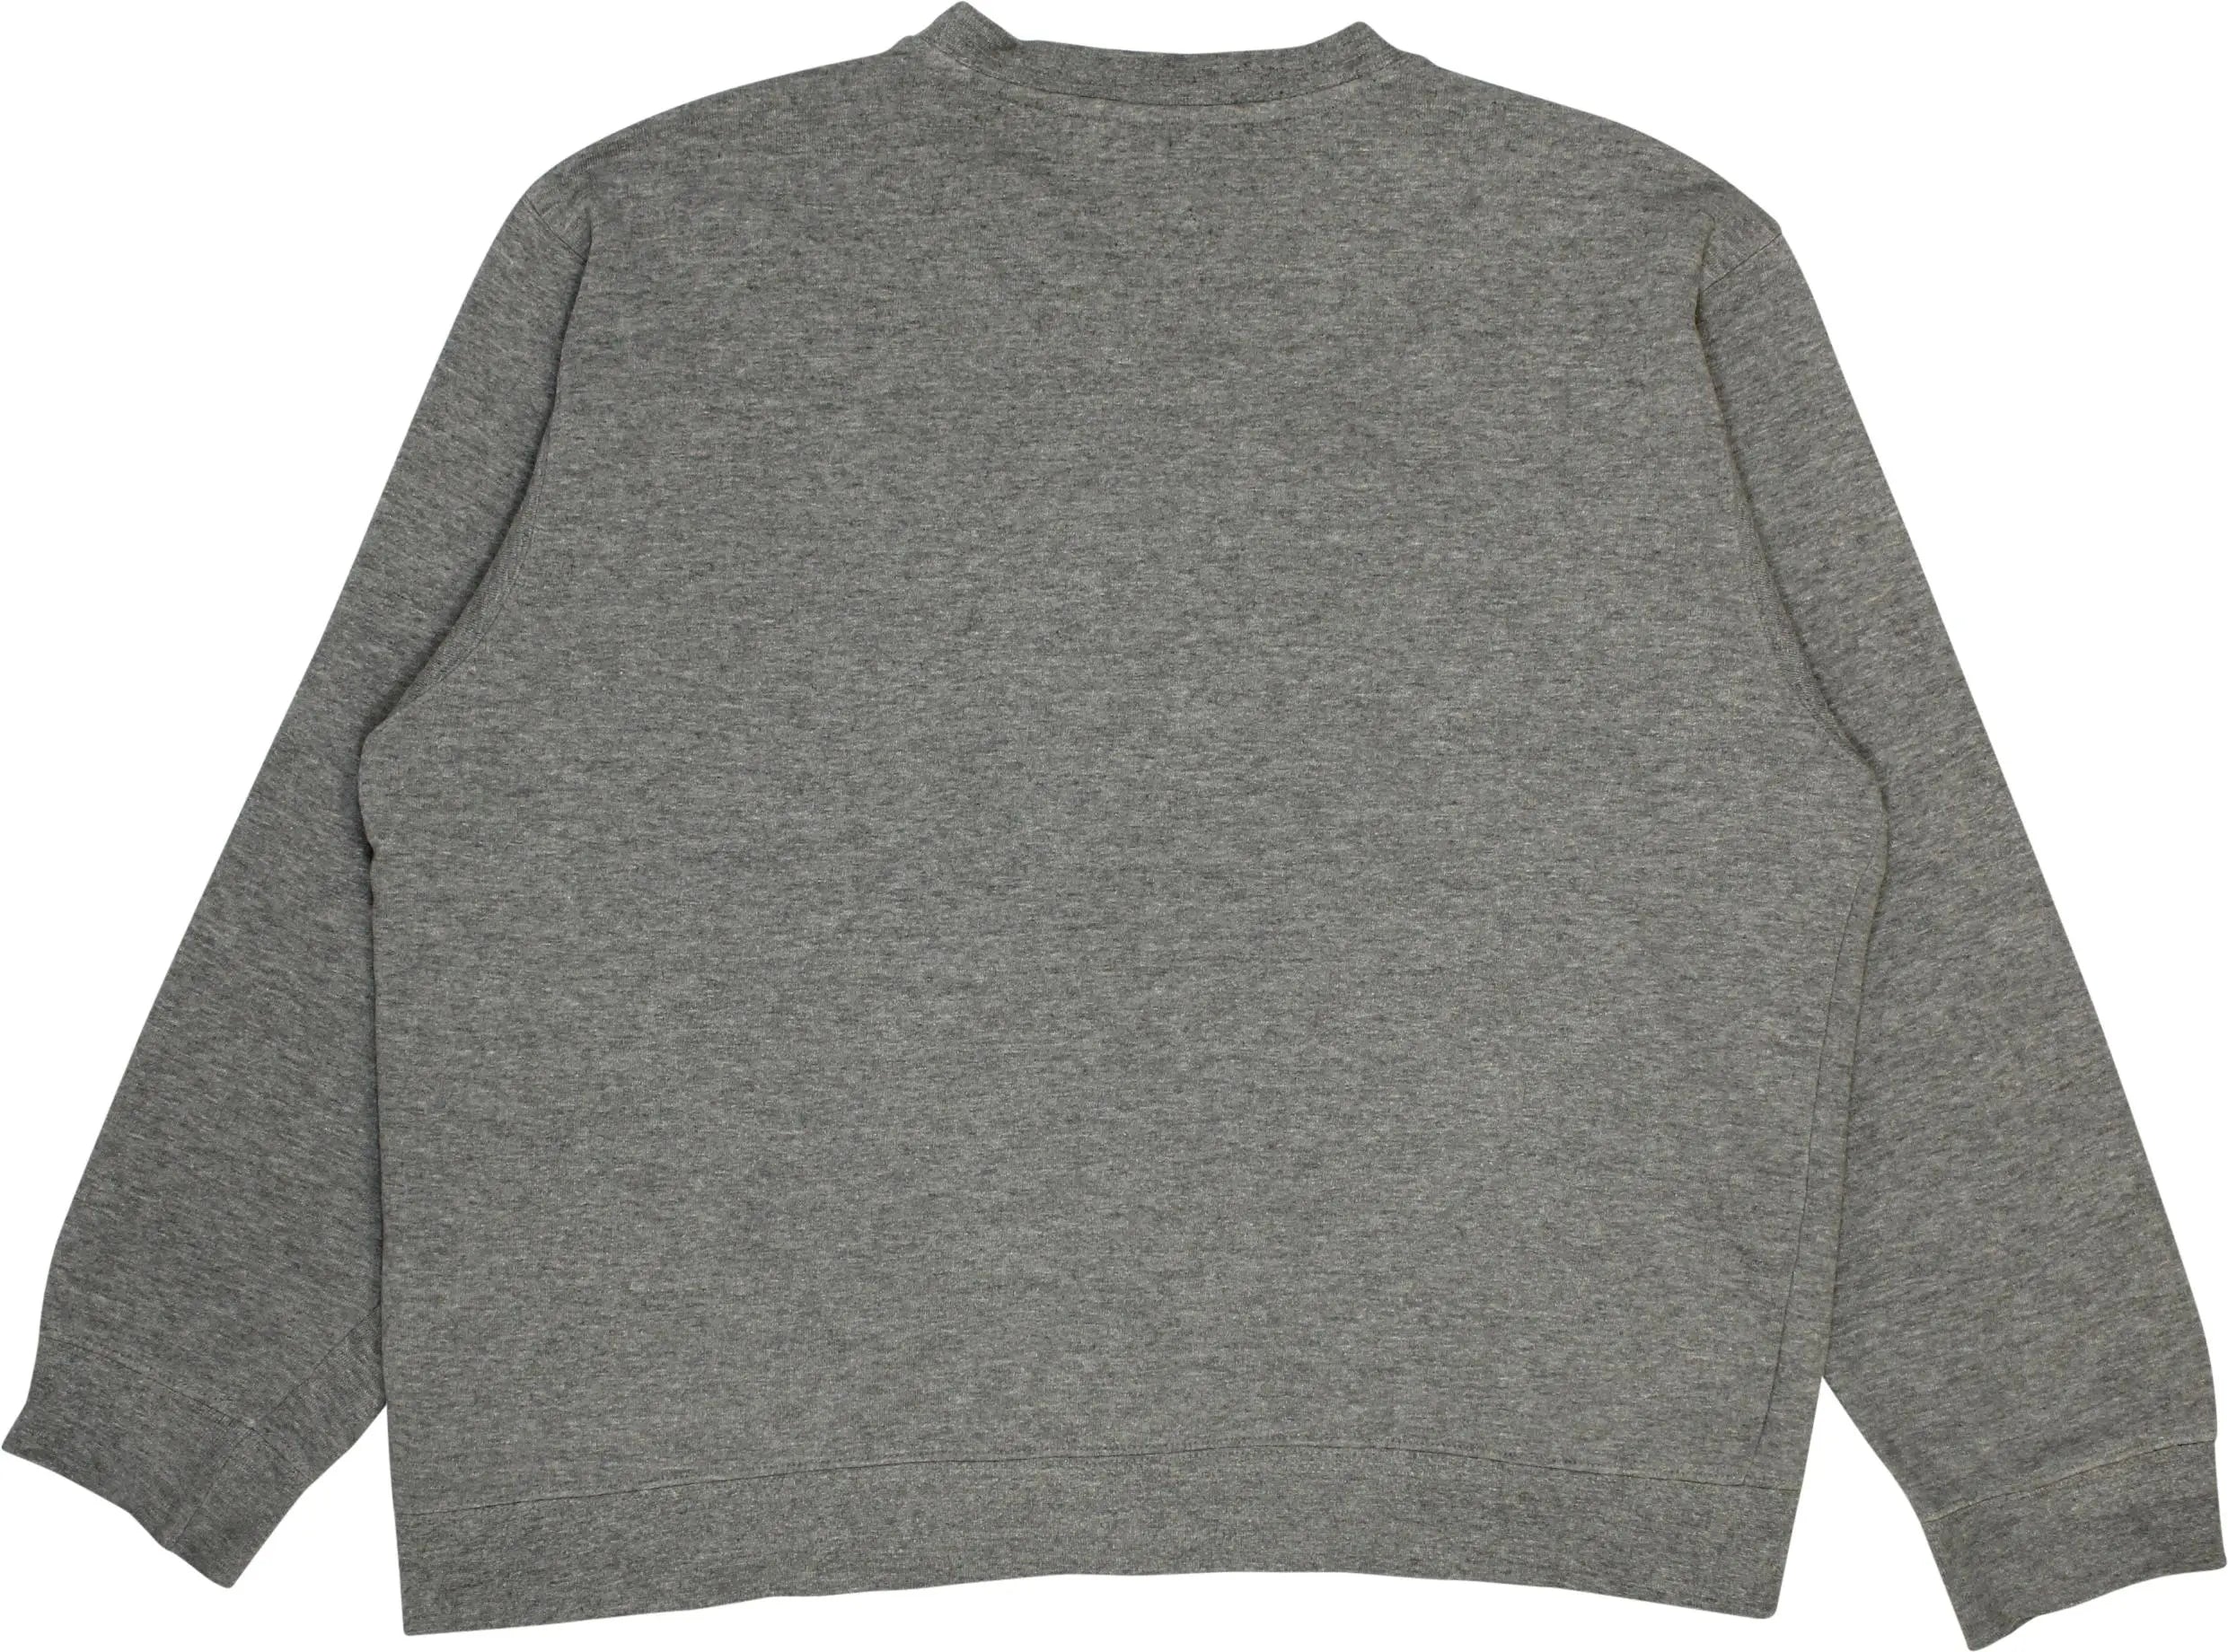 Everlast - Grey Sweater by Everlast- ThriftTale.com - Vintage and second handclothing